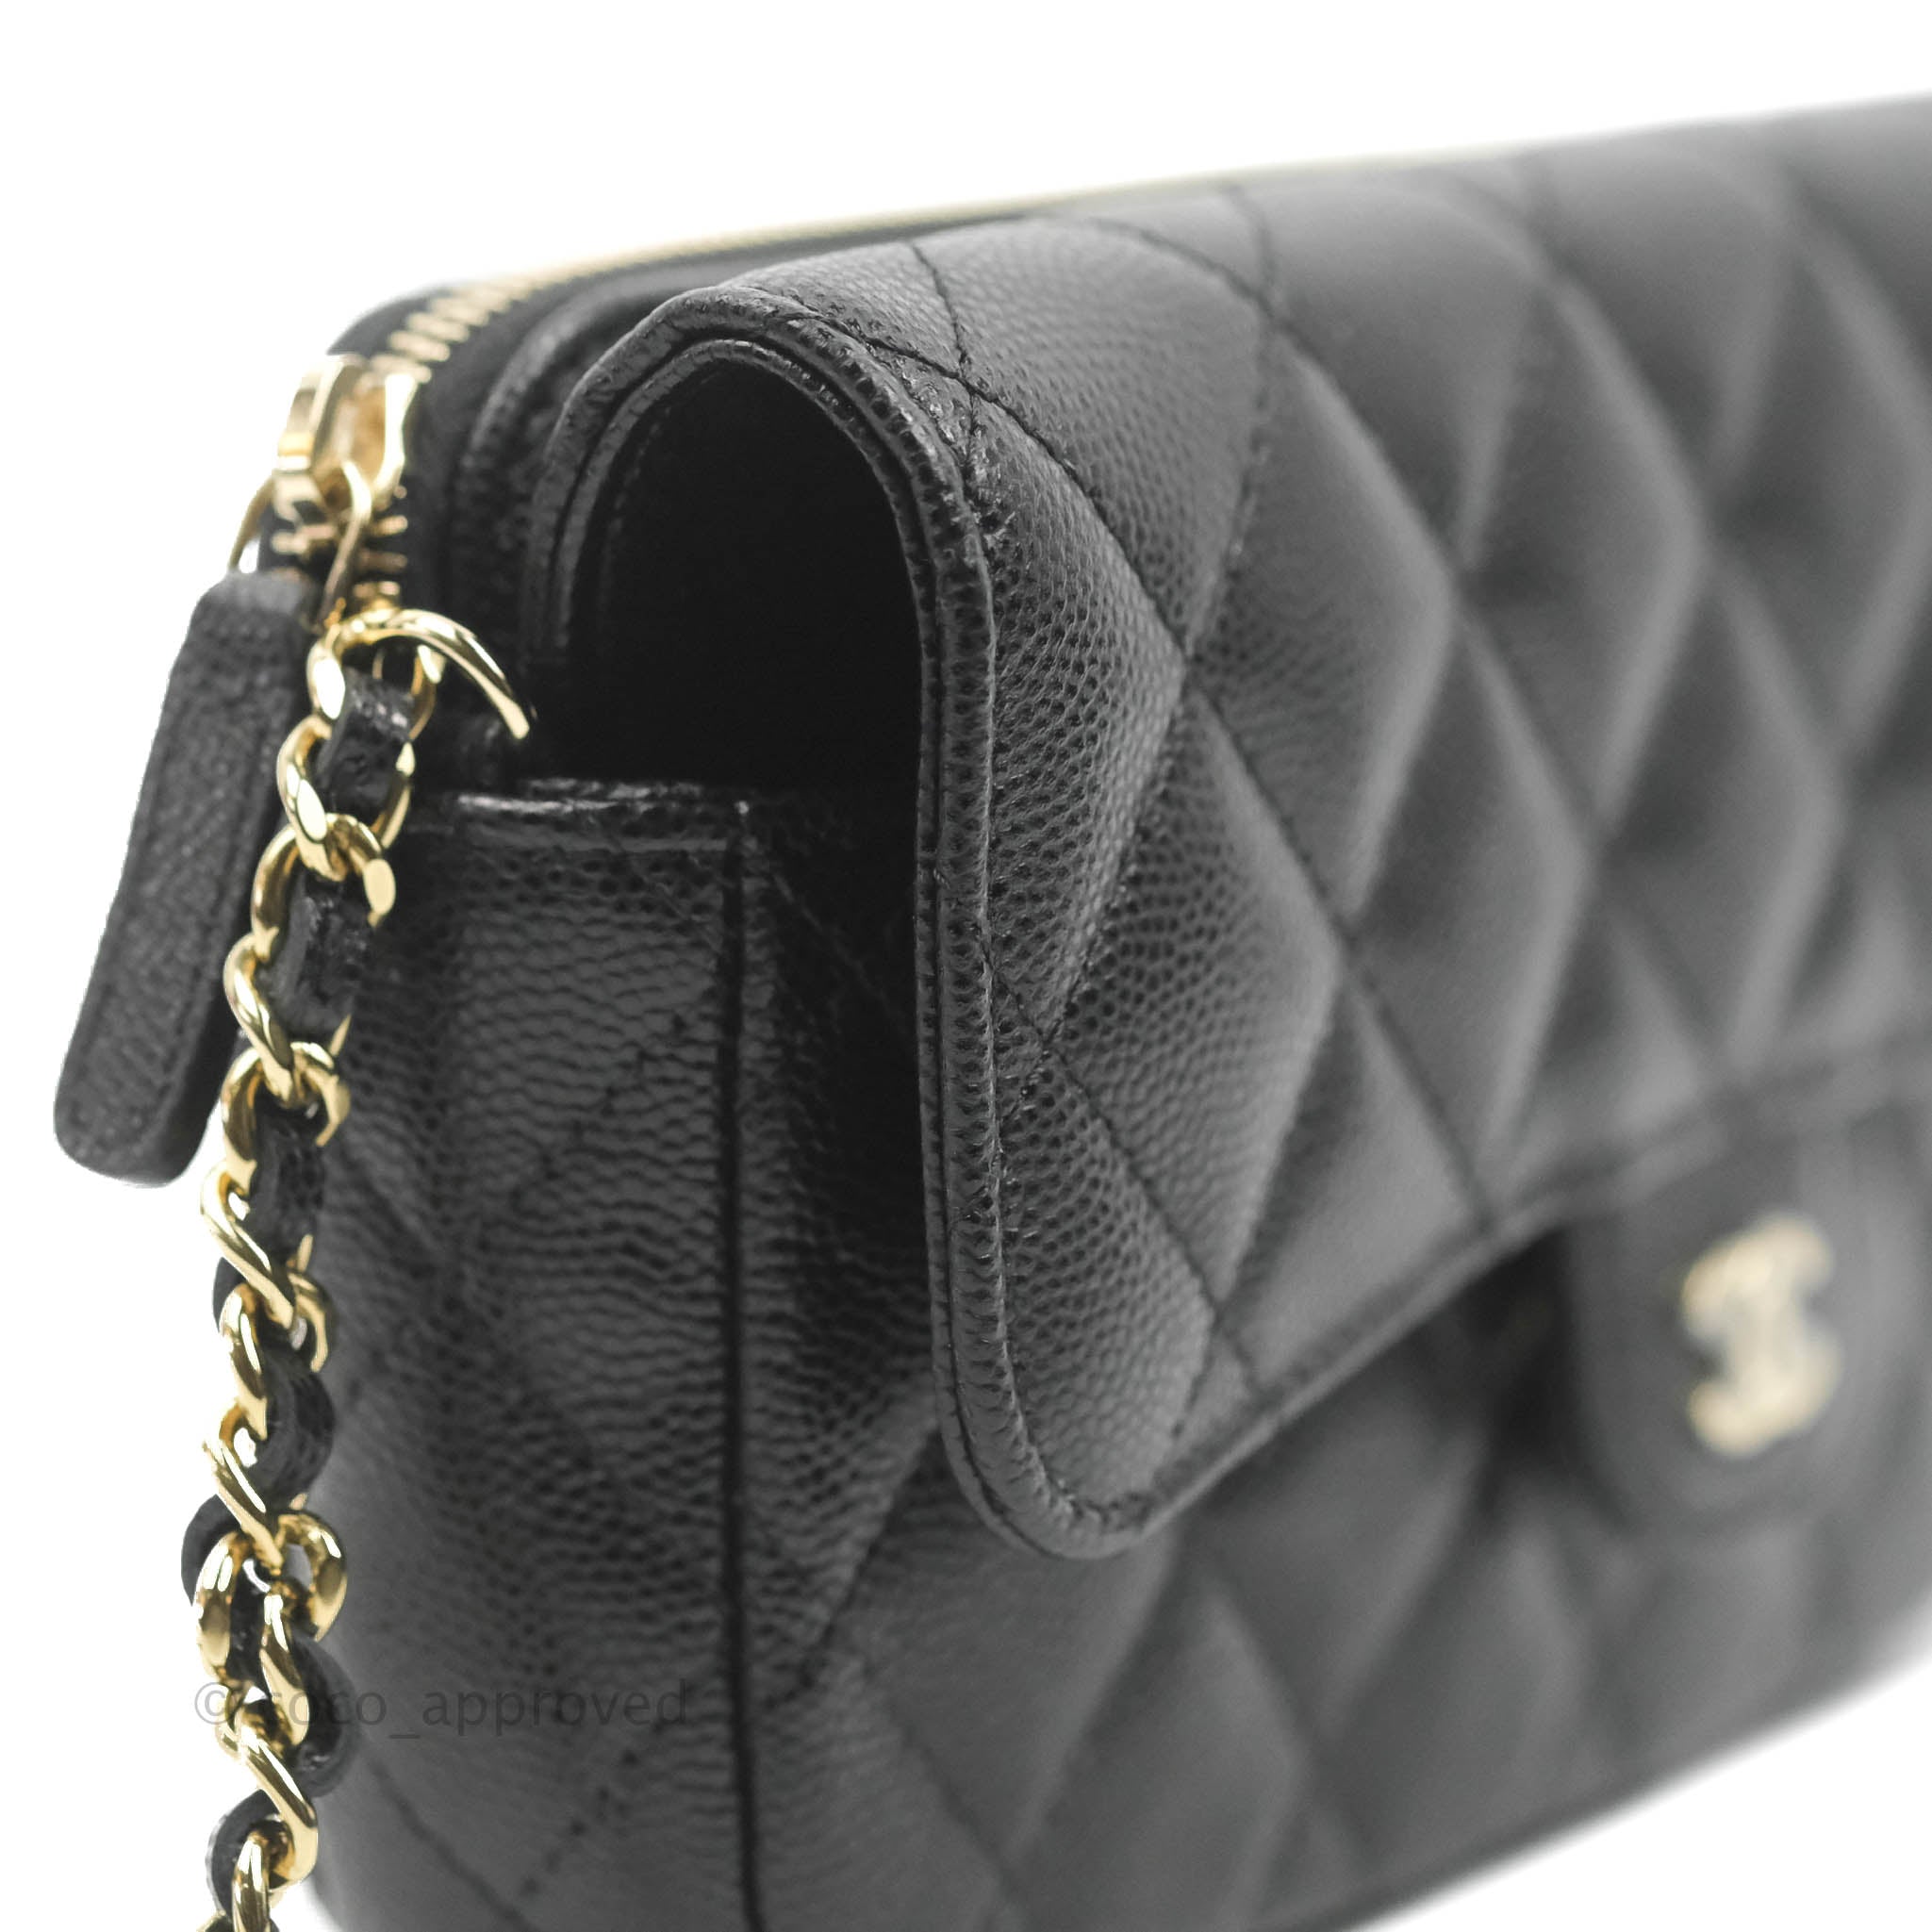 Chanel Classic Flap Phone Holder With Chain Black Caviar Gold Hardware –  Coco Approved Studio